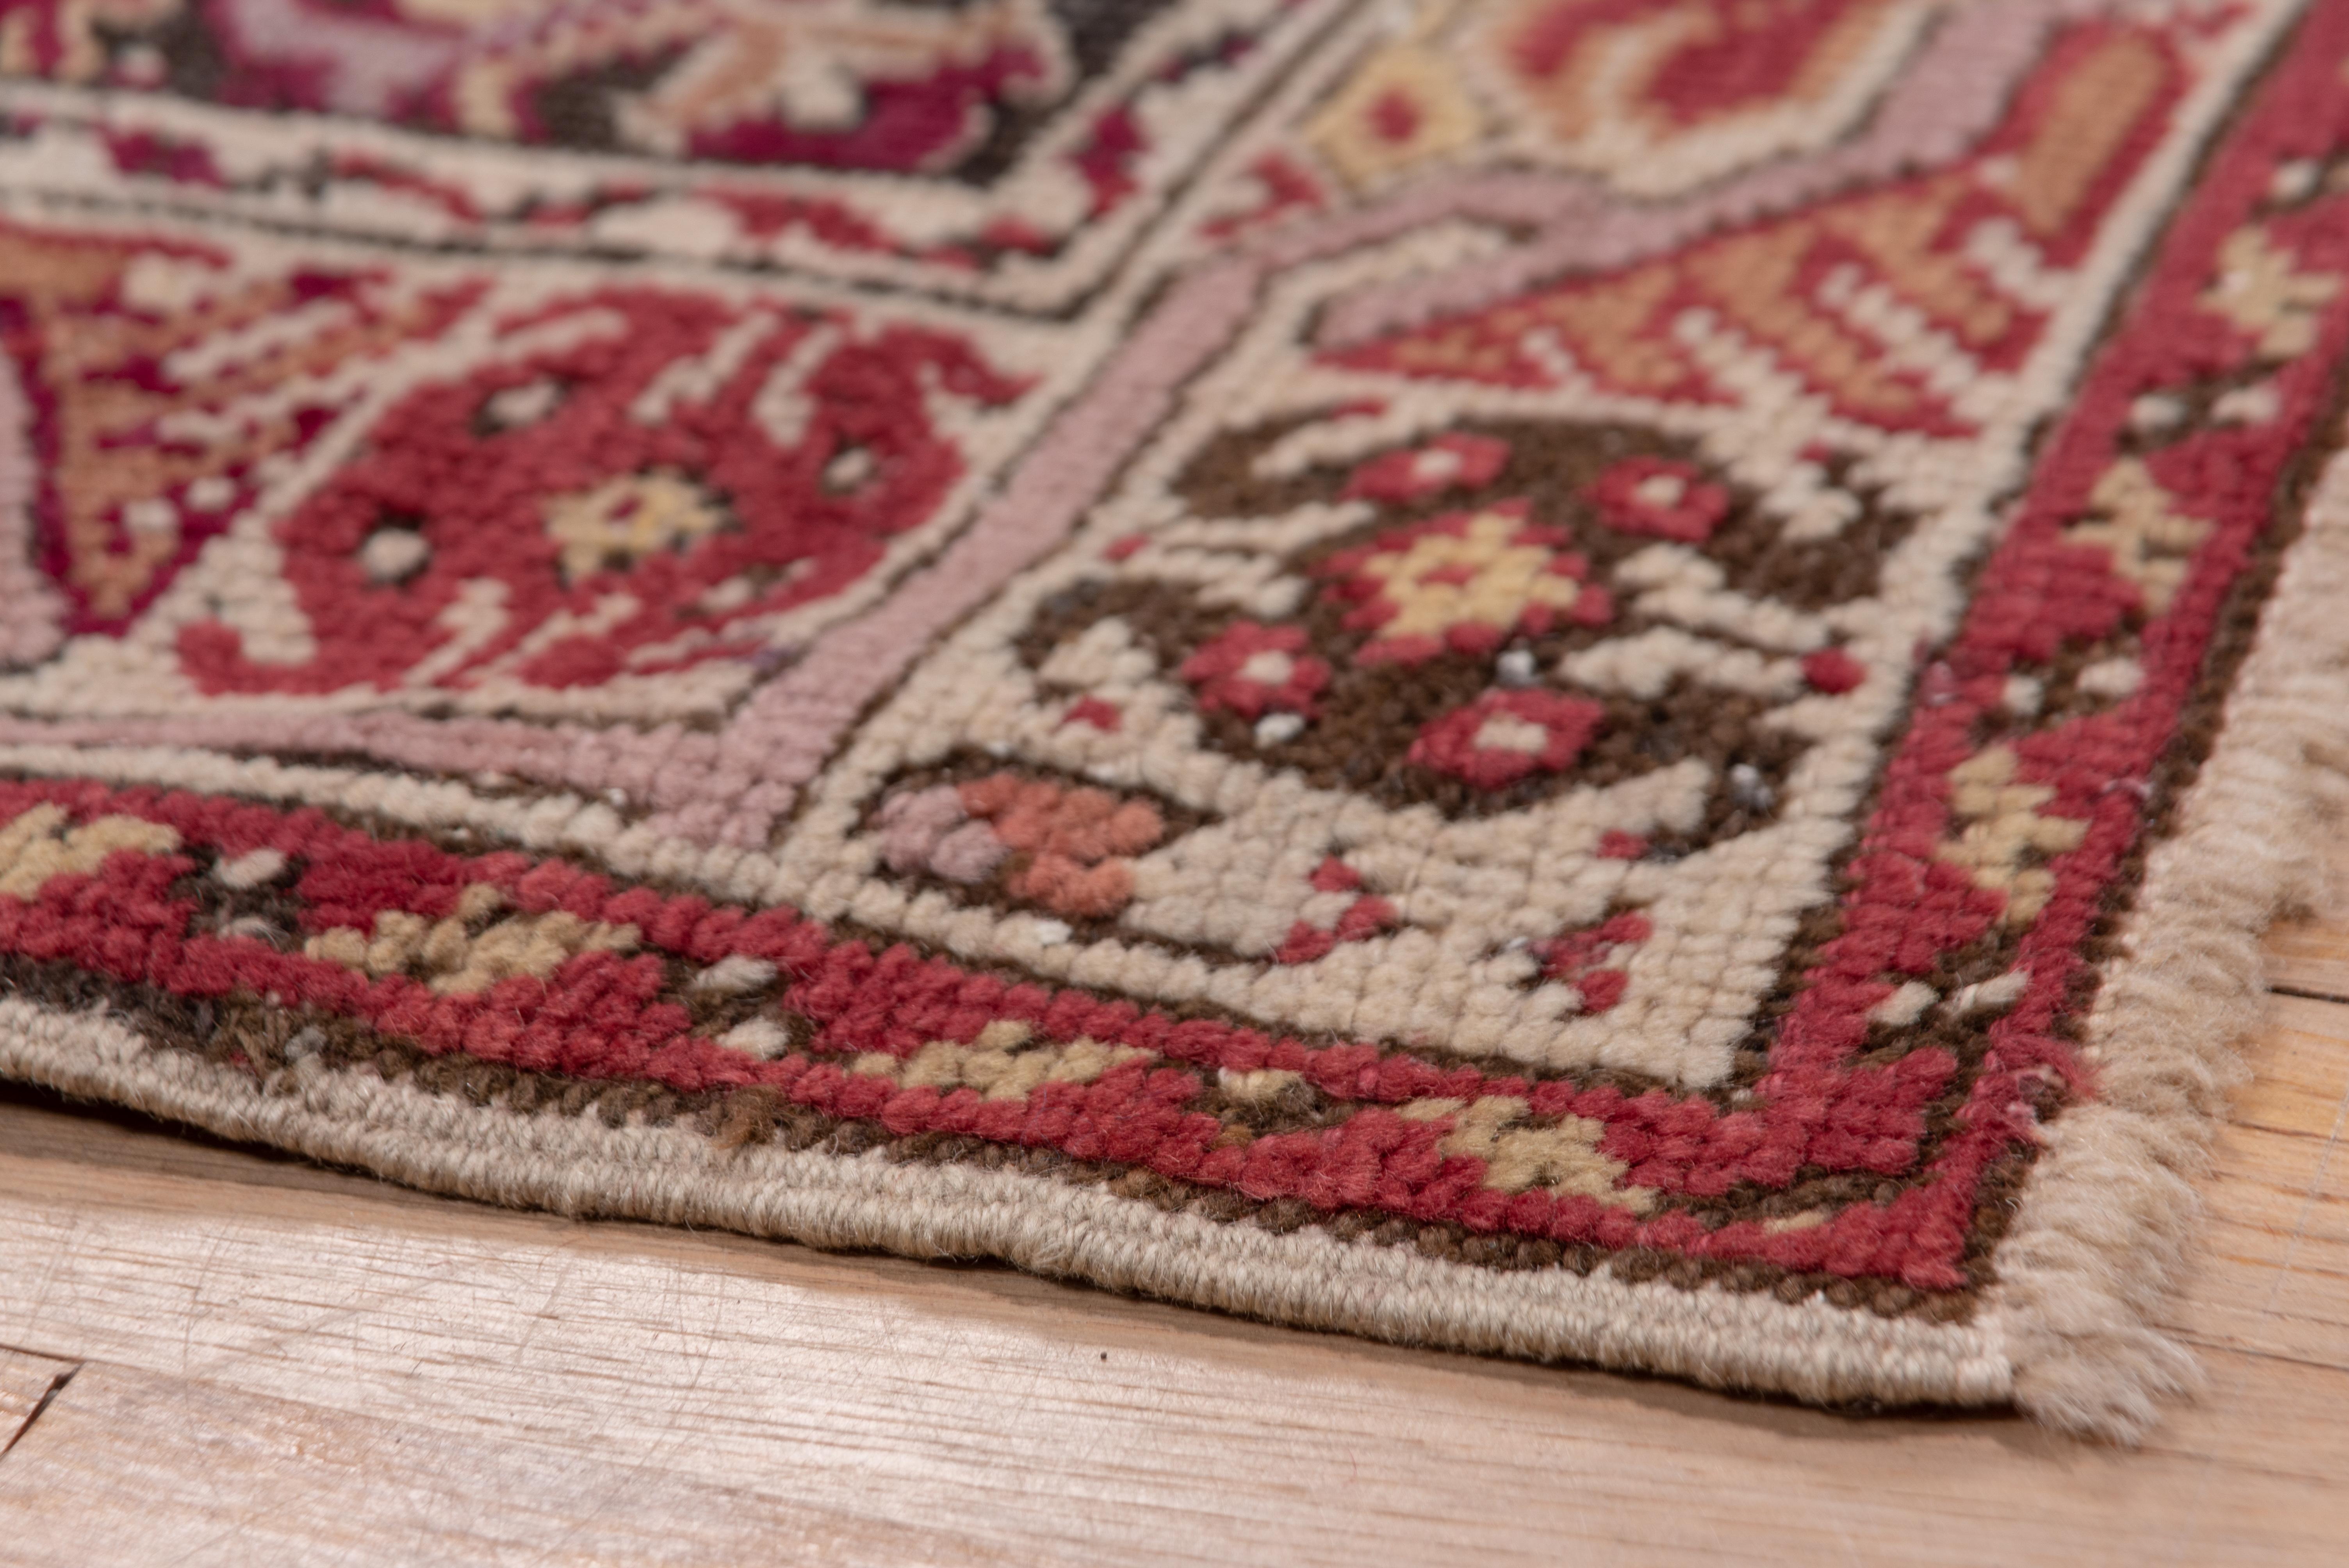 Tribal Finely Woven Antique Turkish Ghiordes Rug, Ruby Red Field, circa 1900s For Sale